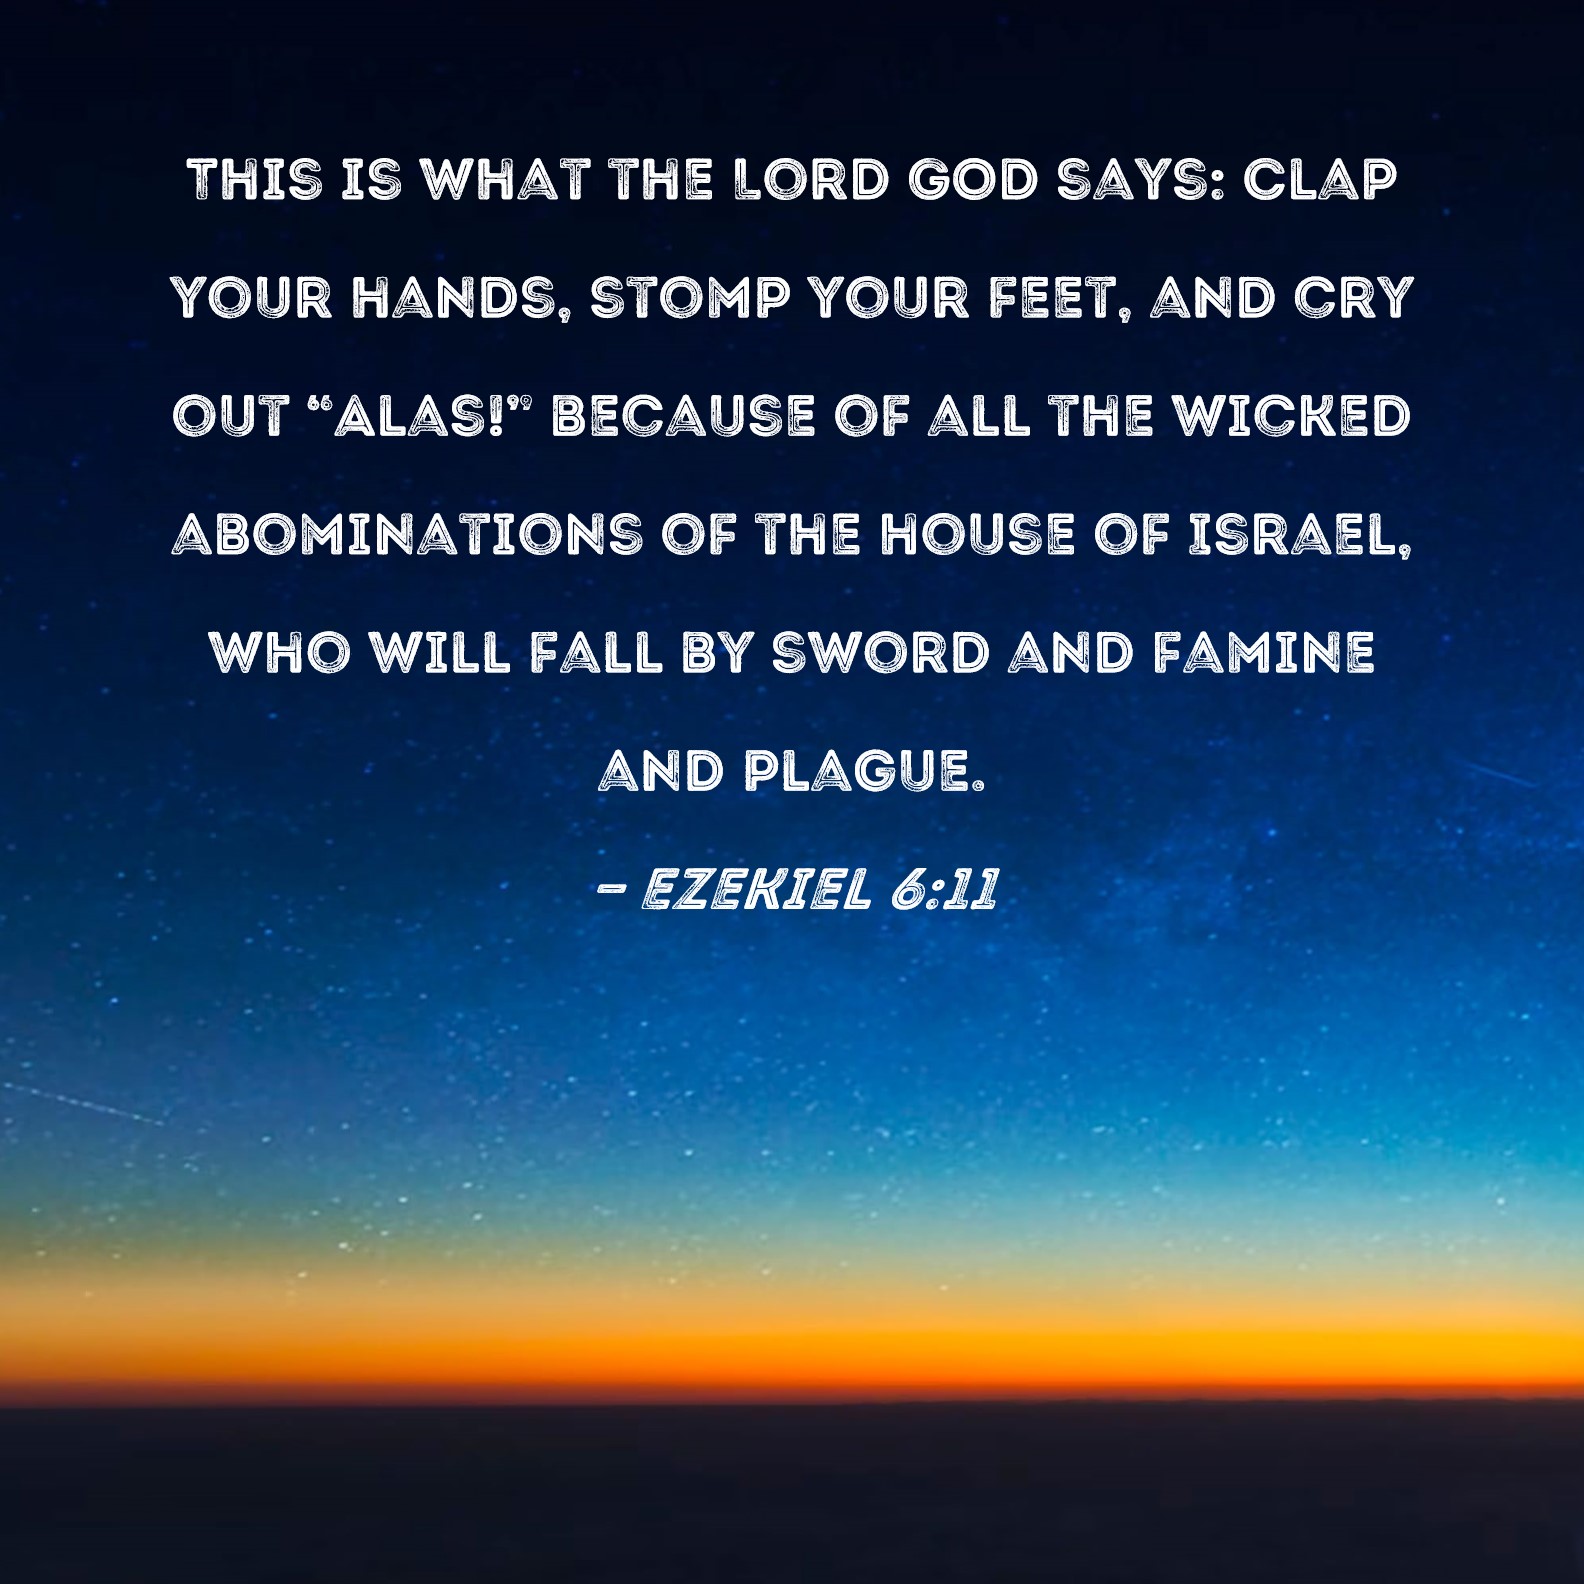 Smag emulering Repræsentere Ezekiel 6:11 This is what the Lord GOD says: Clap your hands, stomp your  feet, and cry out "Alas!" because of all the wicked abominations of the  house of Israel, who will